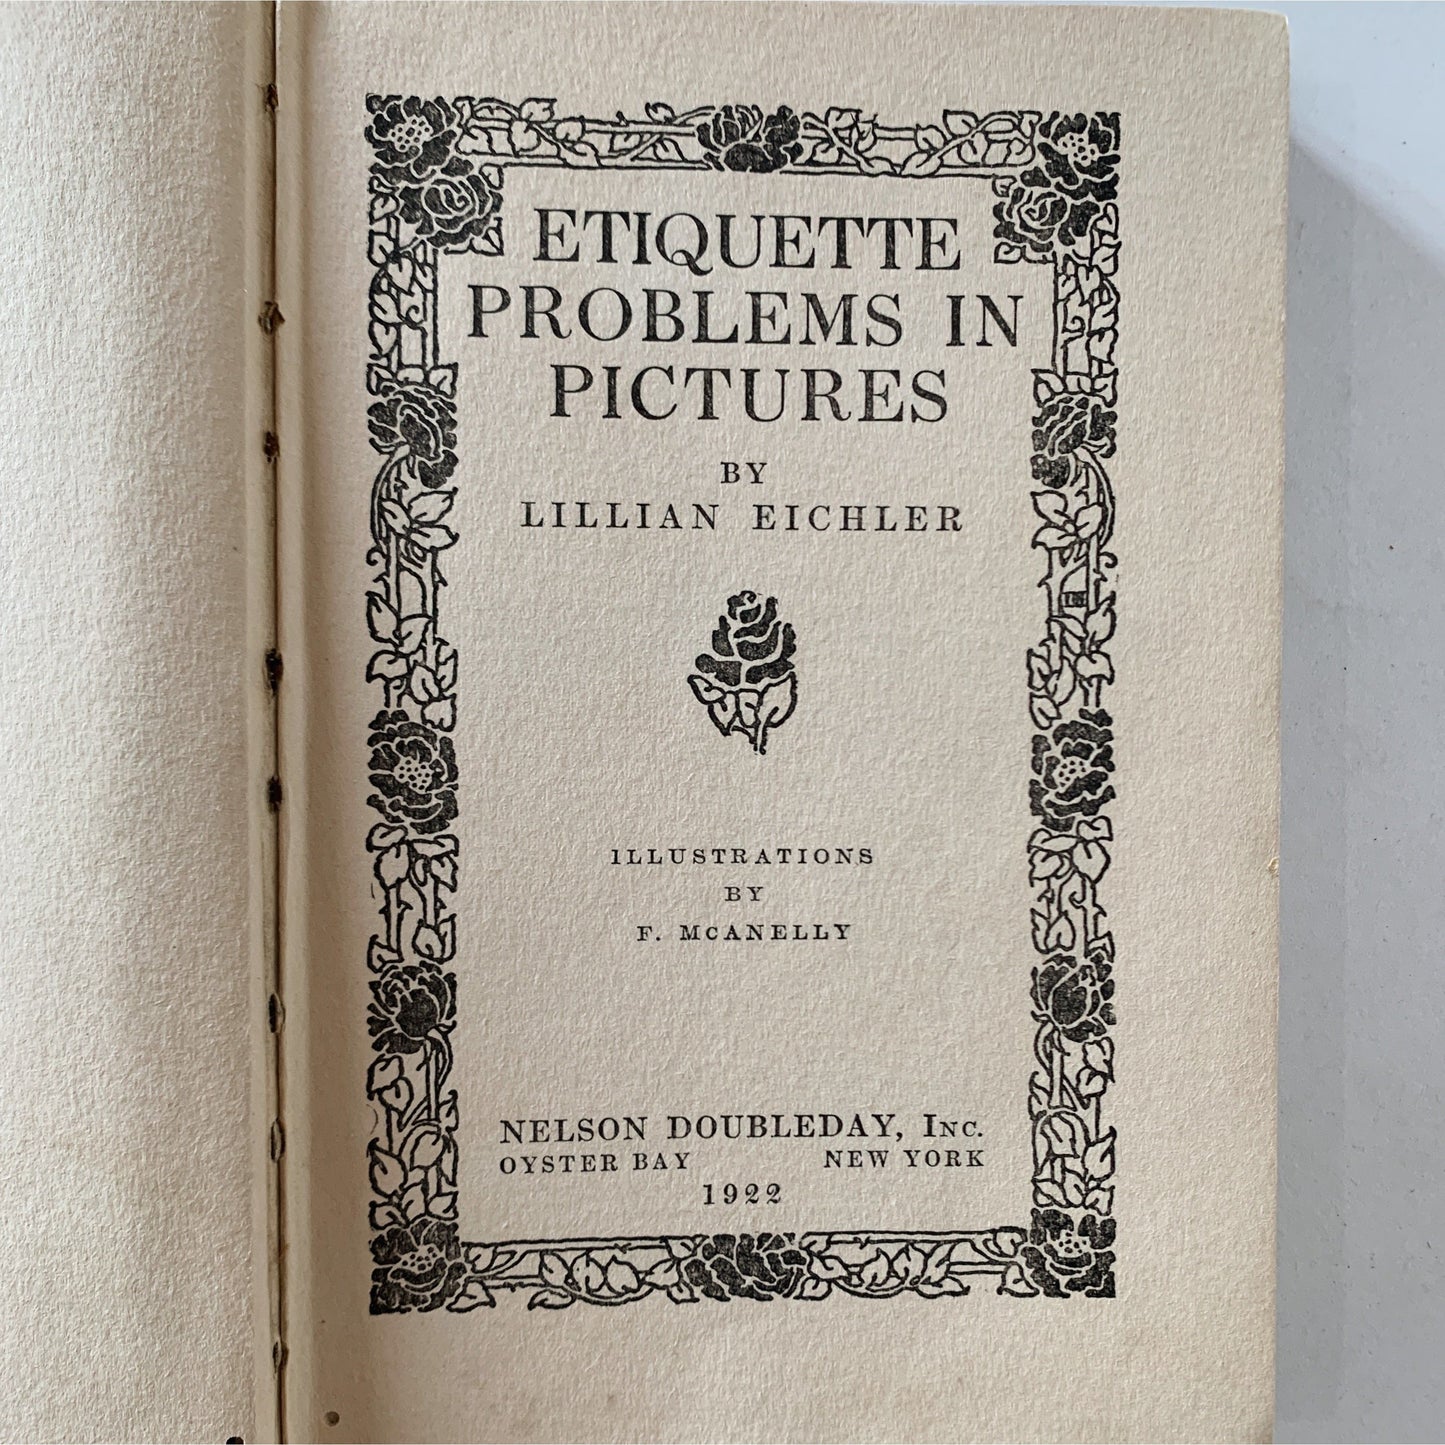 Etiquette Problems in Pictures, 1922, Lillian Eichler, Illustrated